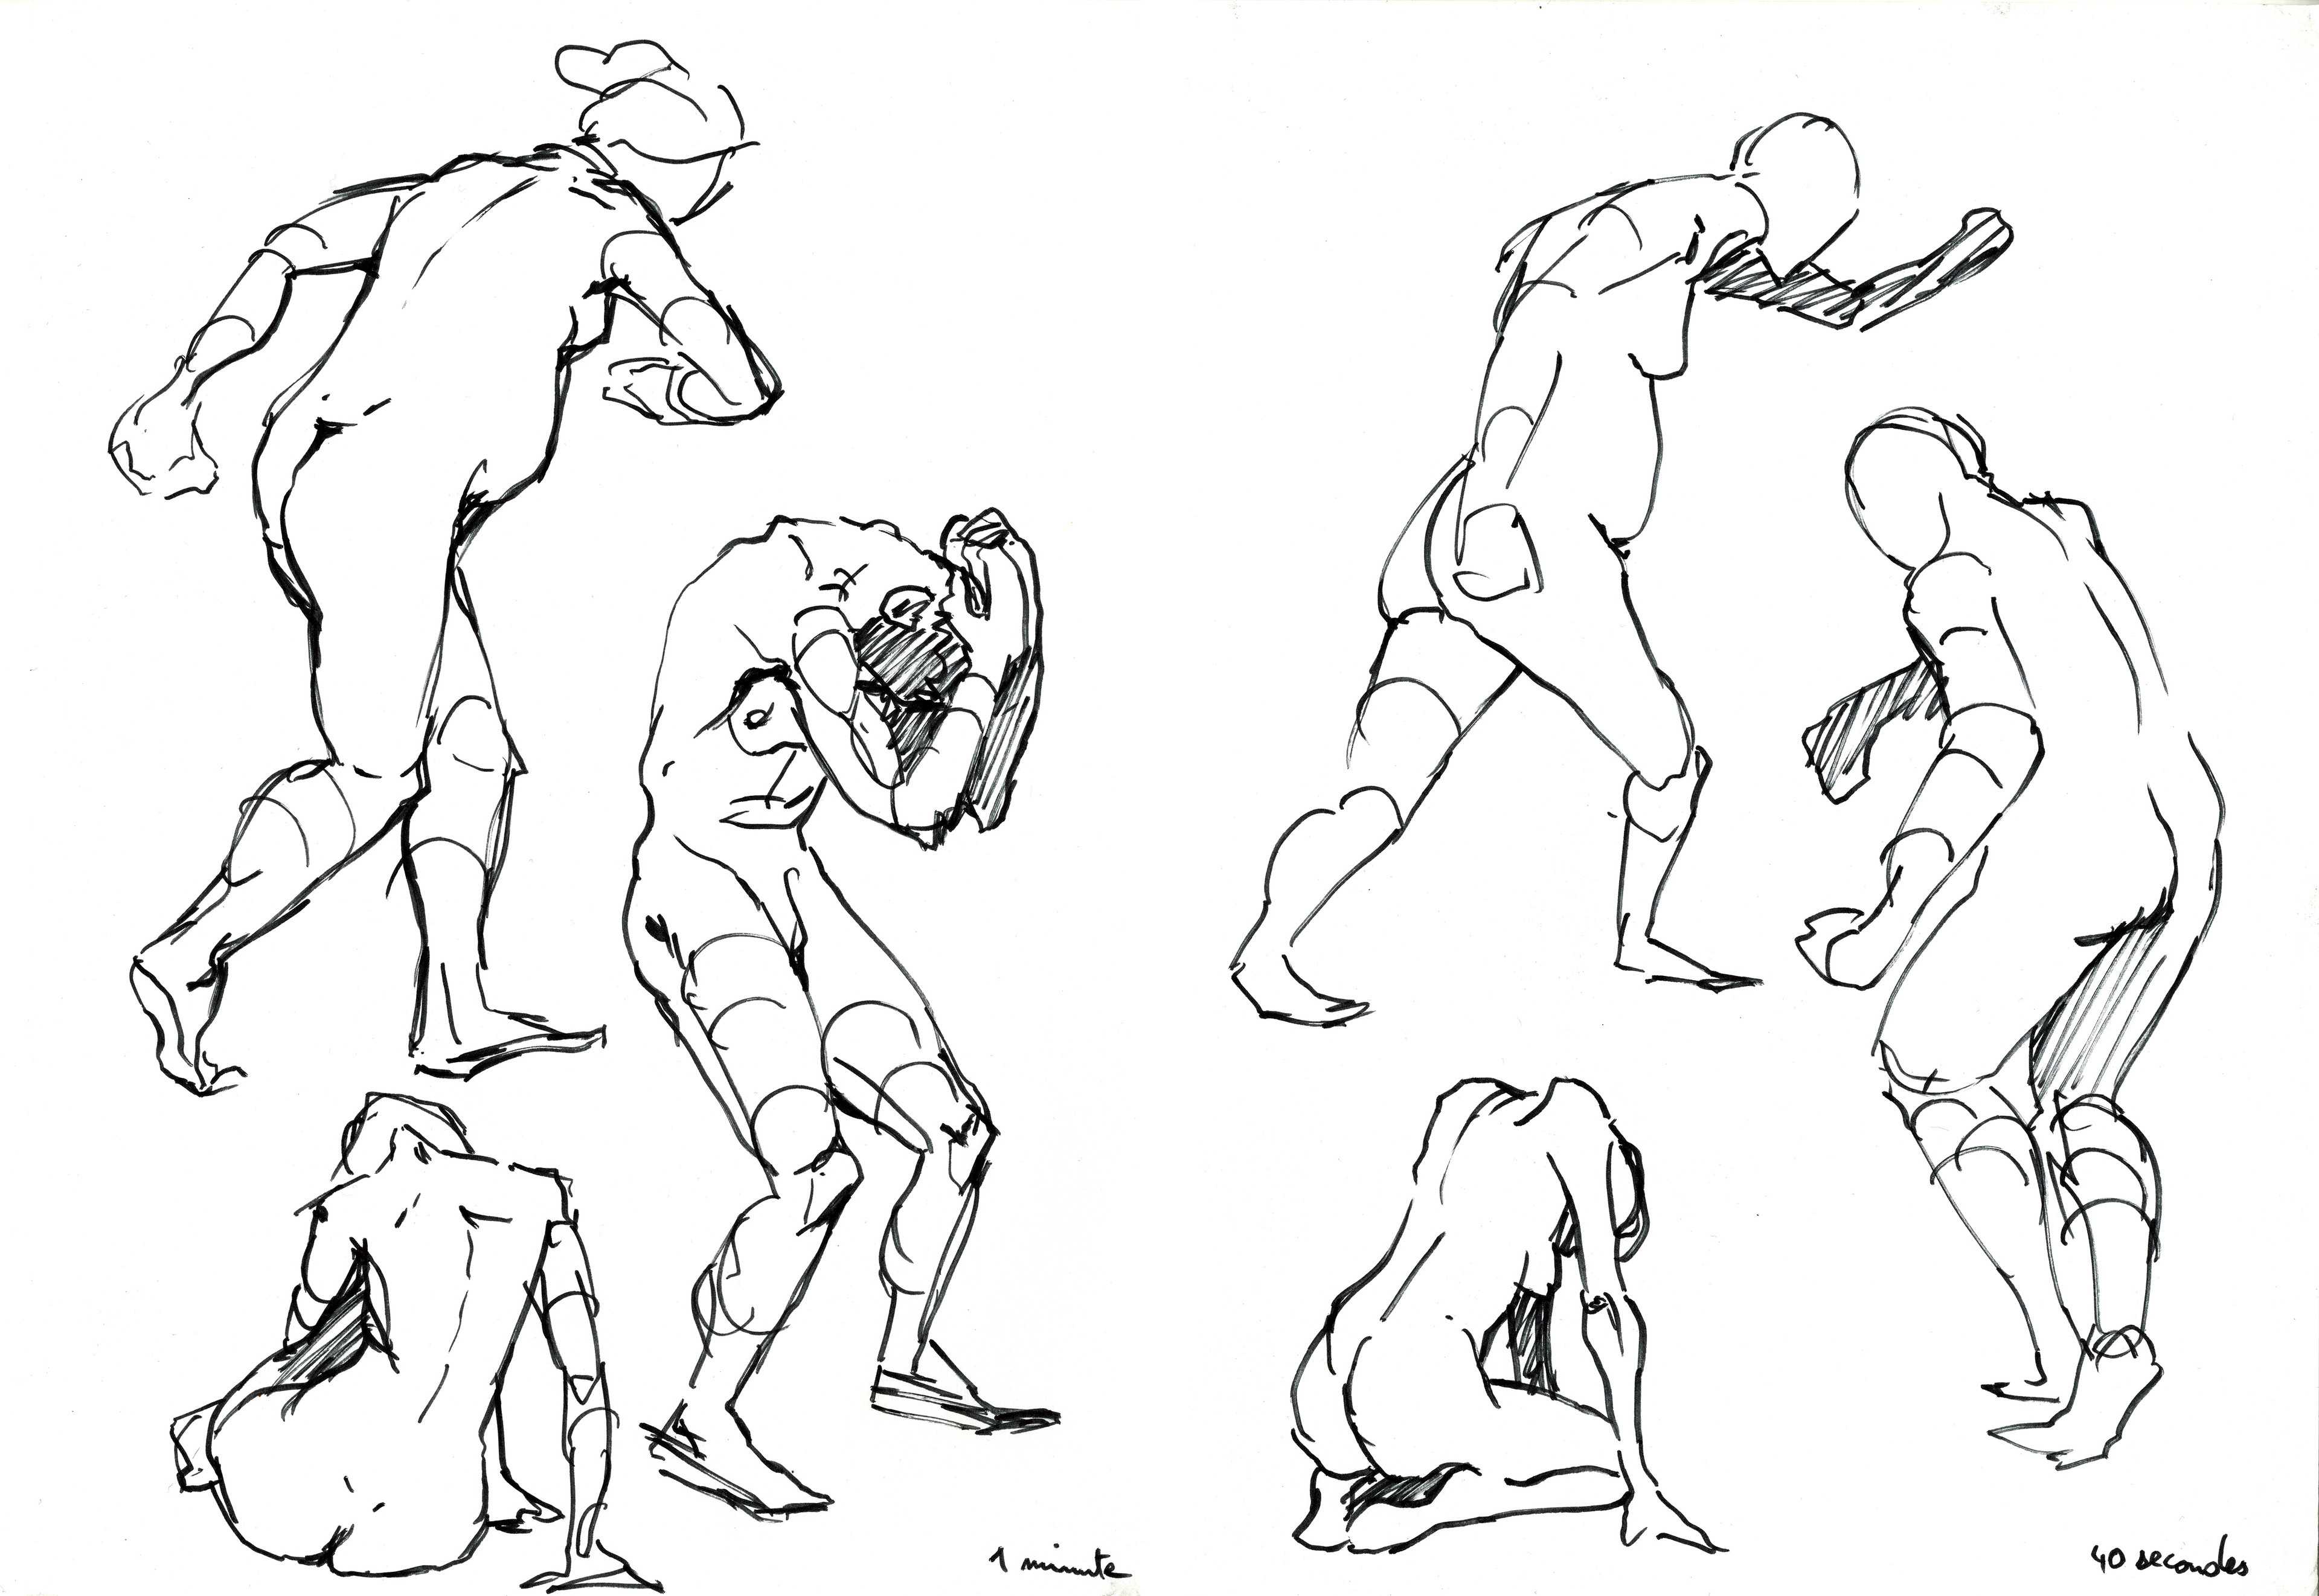 1 minute poses.